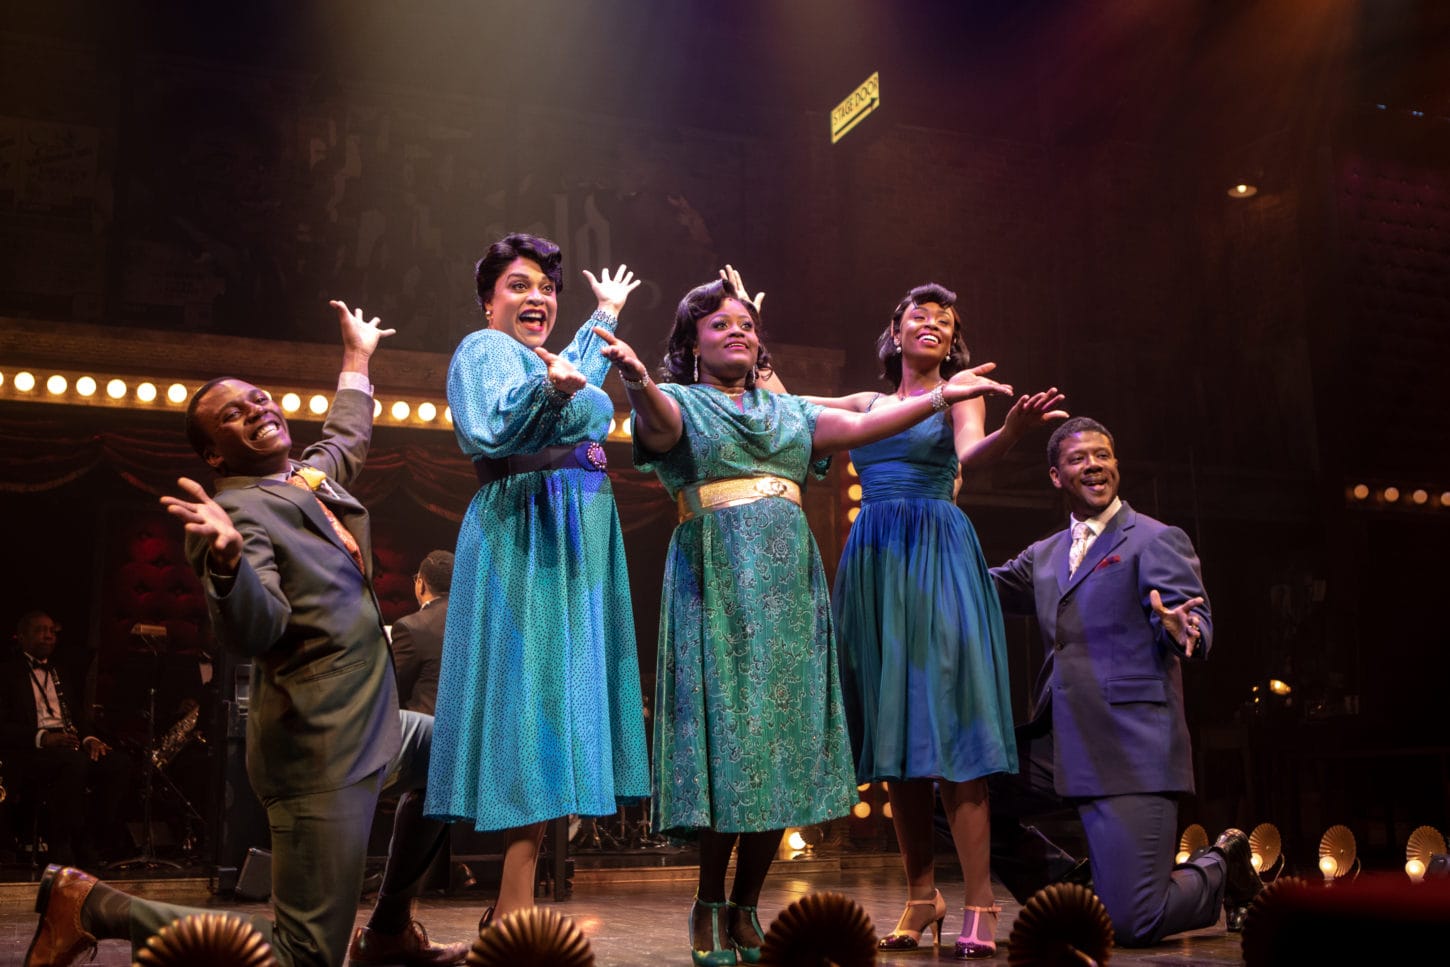 L-R: Solomon Parker III, Iyona Blake, Nova Y. Payton, Korinn Walfall, and Kevin McAllister in Ain't Misbehavin' at Signature Theatre. Photo by Christopher Mueller.